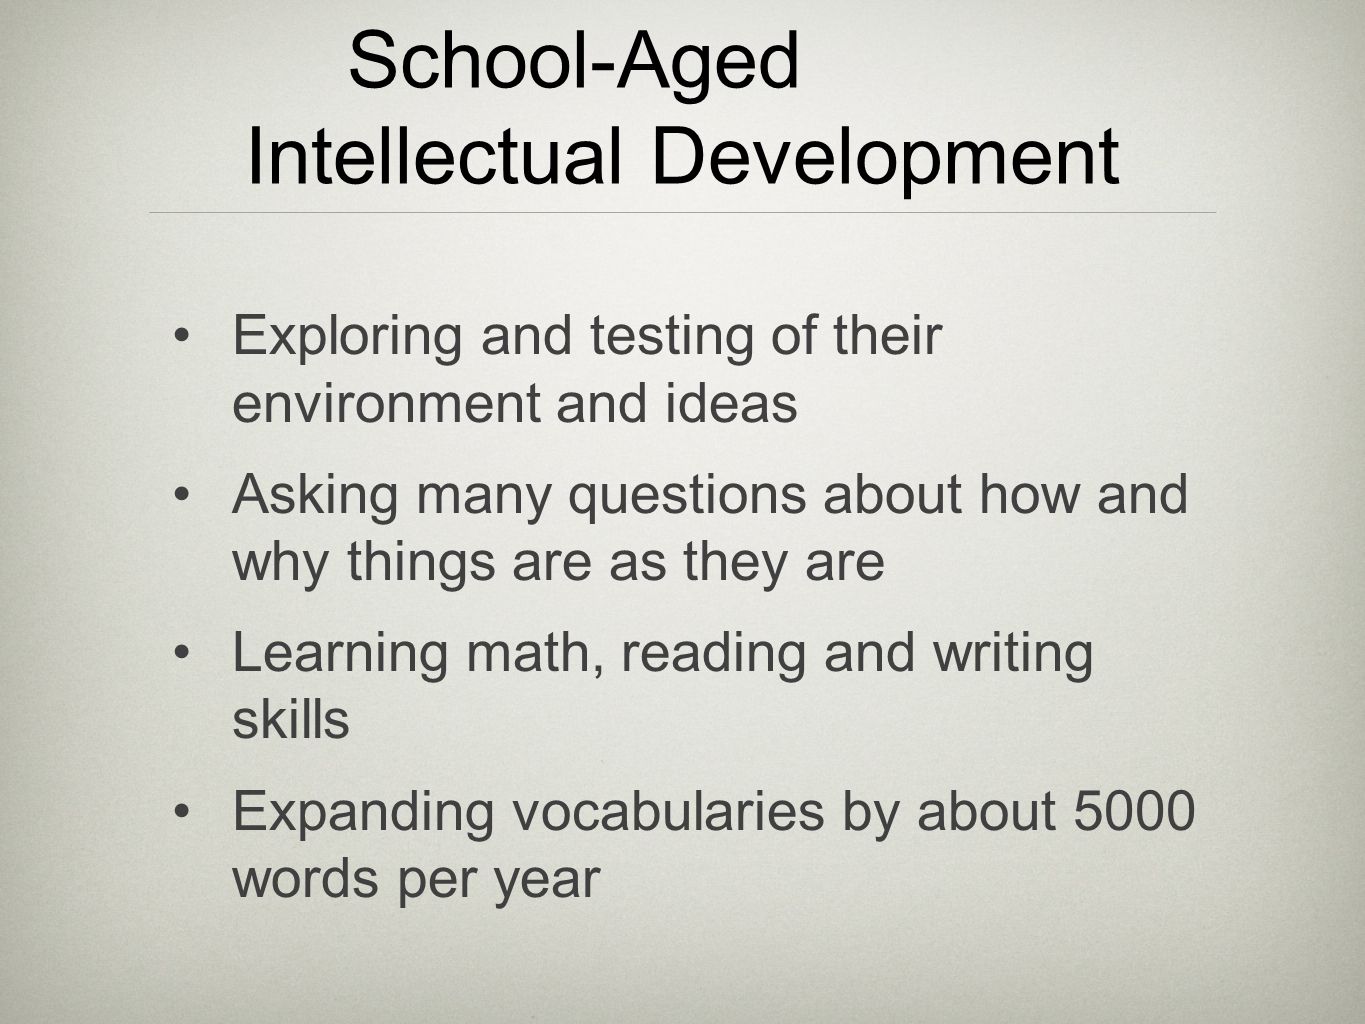 School-Aged Intellectual Development Exploring and testing of their environment and ideas Asking many questions about how and why things are as they are Learning math, reading and writing skills Expanding vocabularies by about 5000 words per year